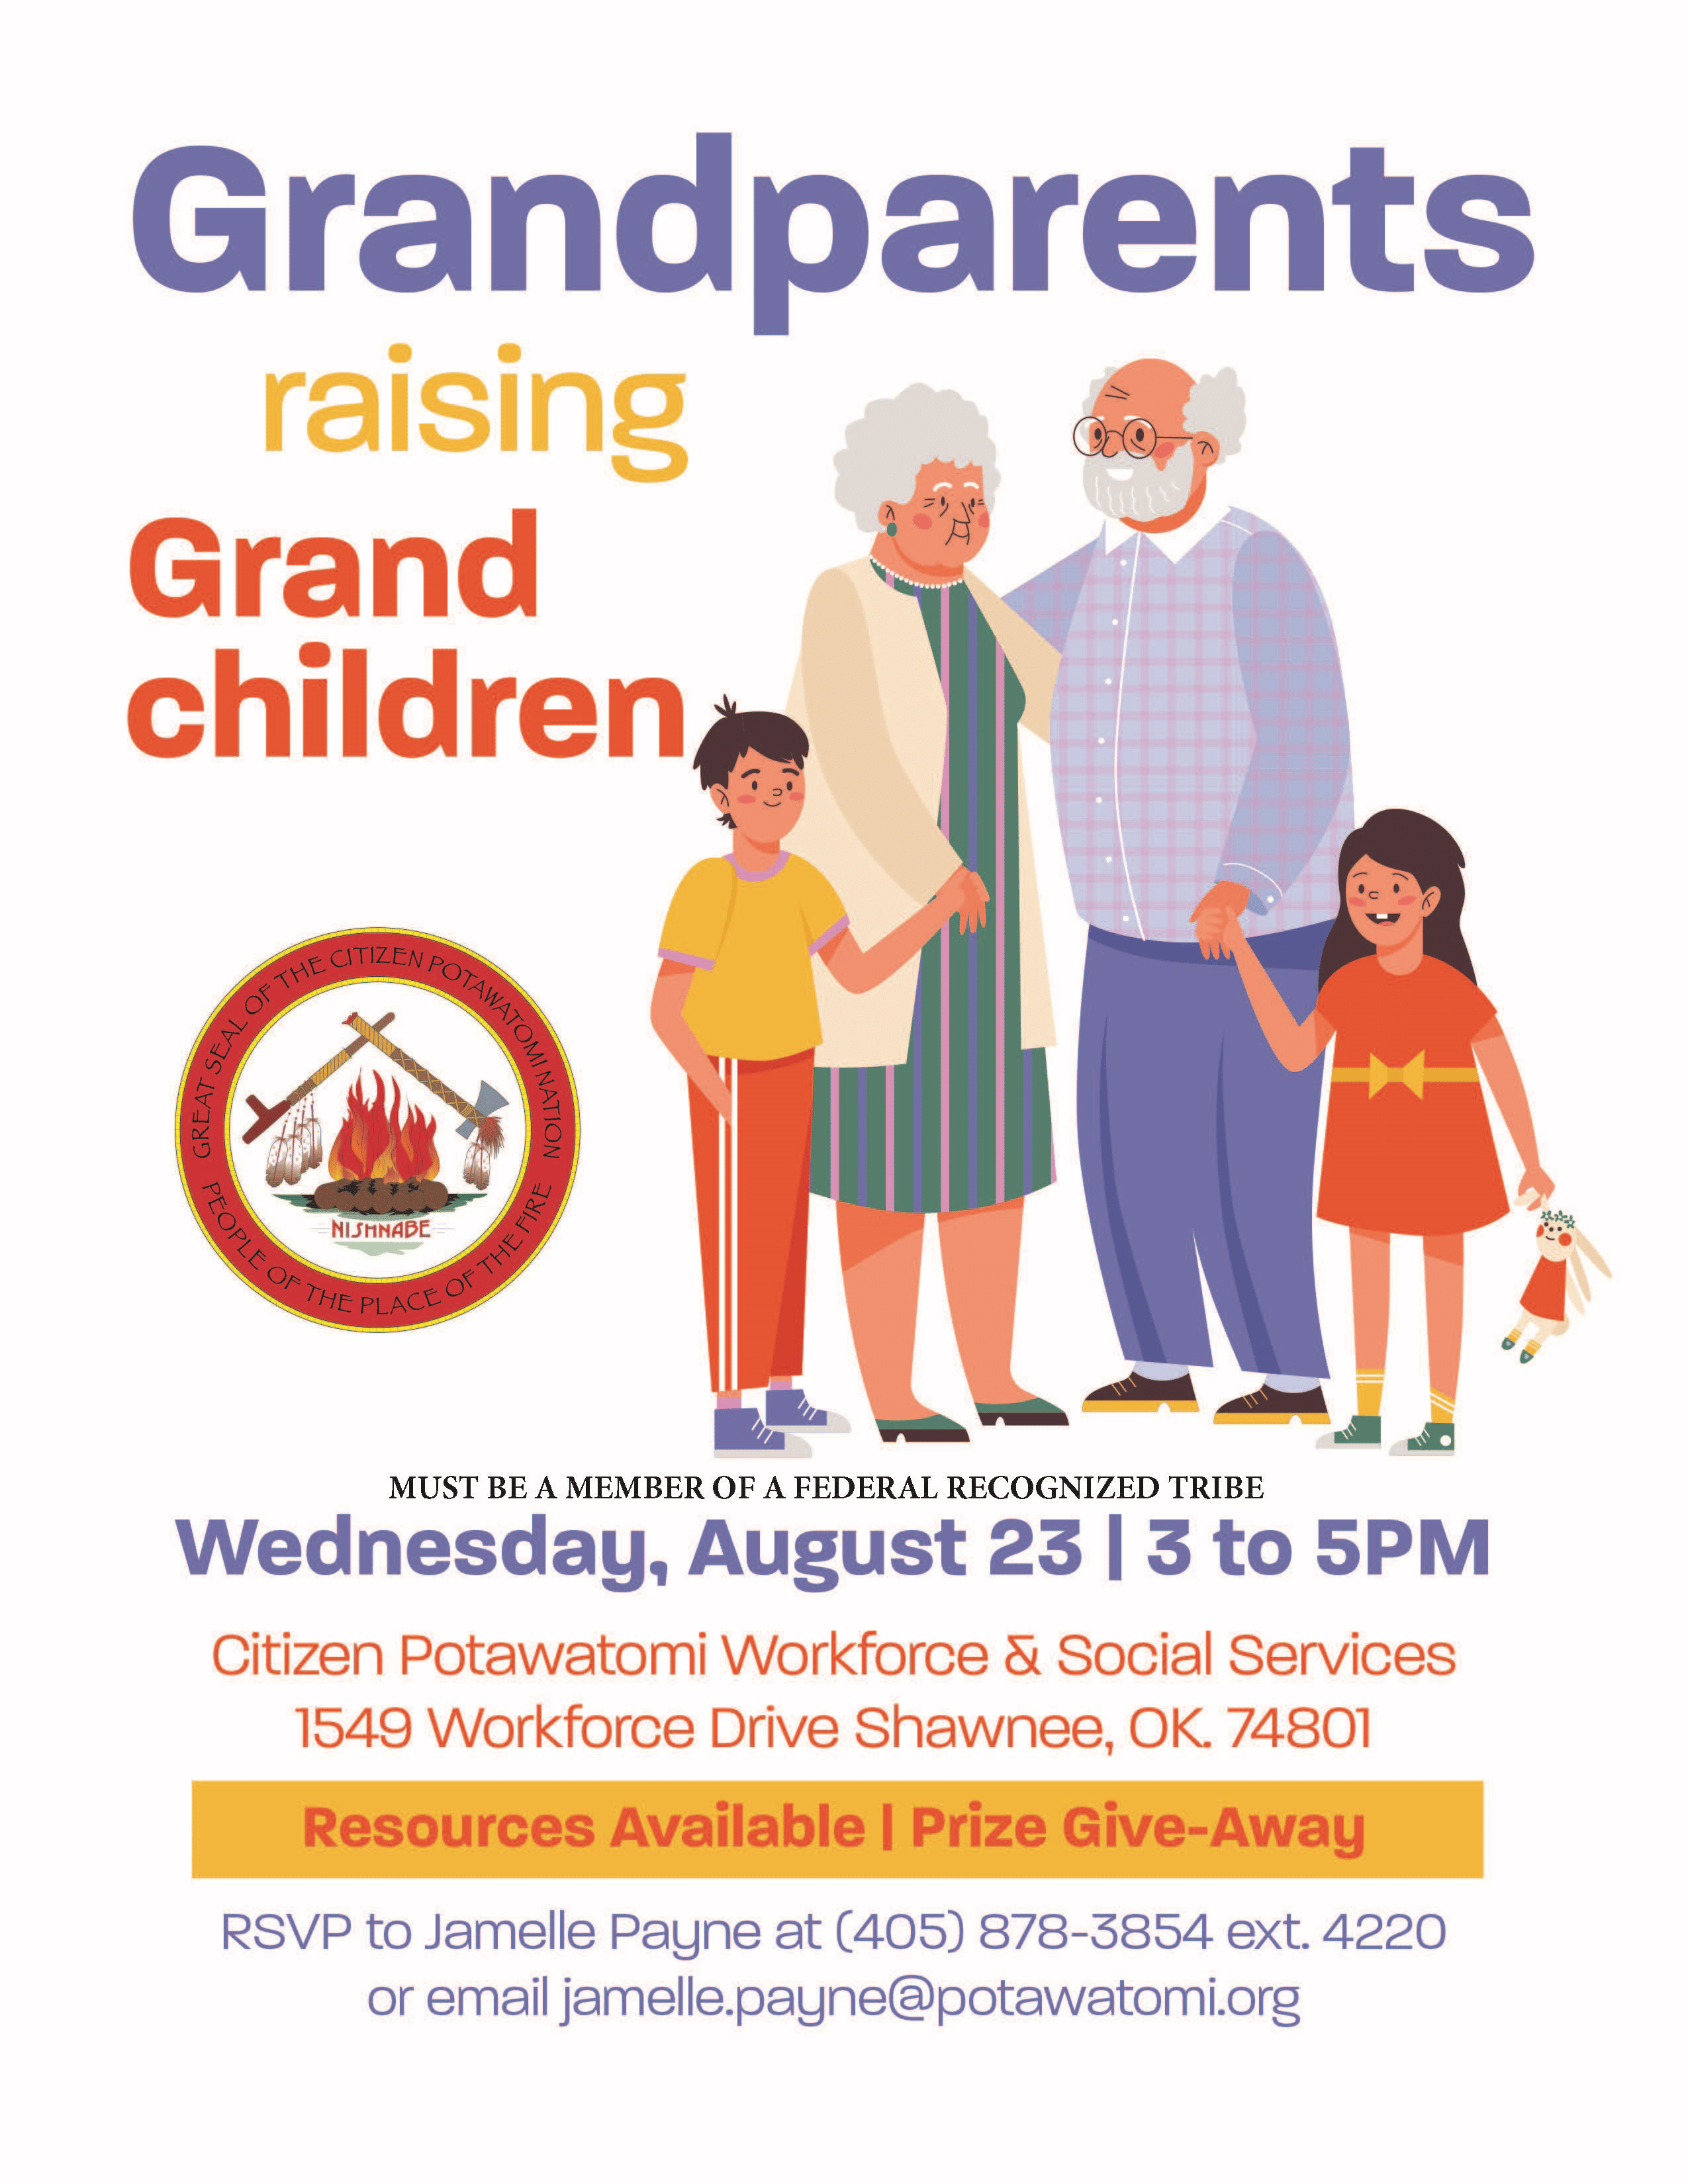 Flyer with red, yellow and purple text advertising a resource event for grandparents raising grandchildren. A cartoon image of a family of four, with two elderly adults and two small children, as well as the CPN seal are on the flyer.